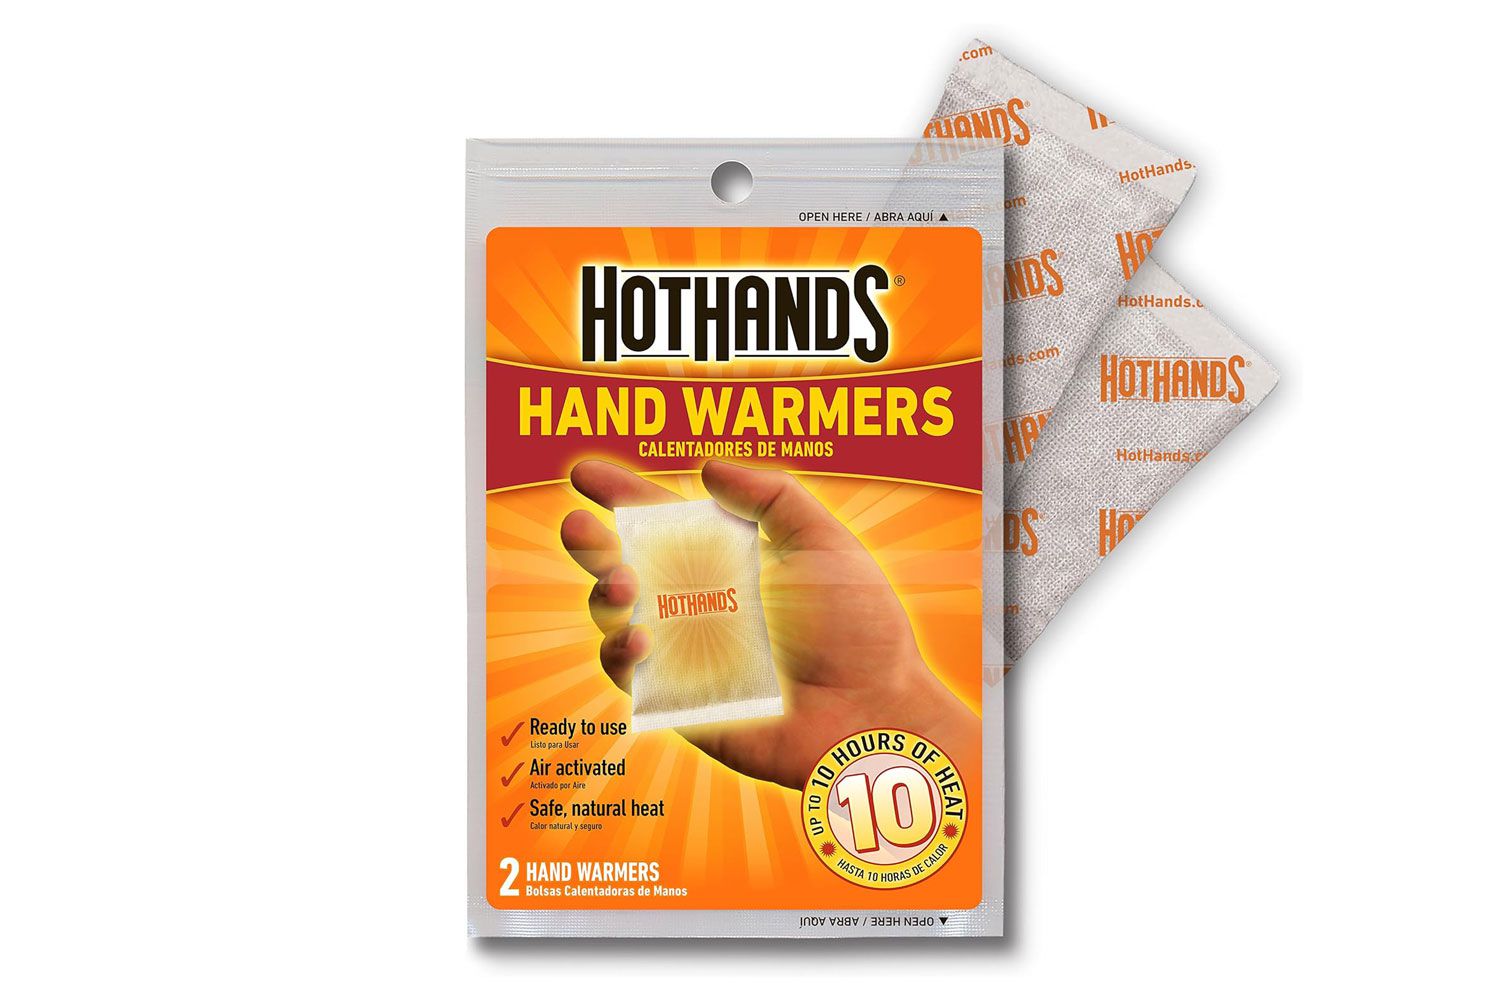 Amazon HotHands Hand Warmer Value Pack